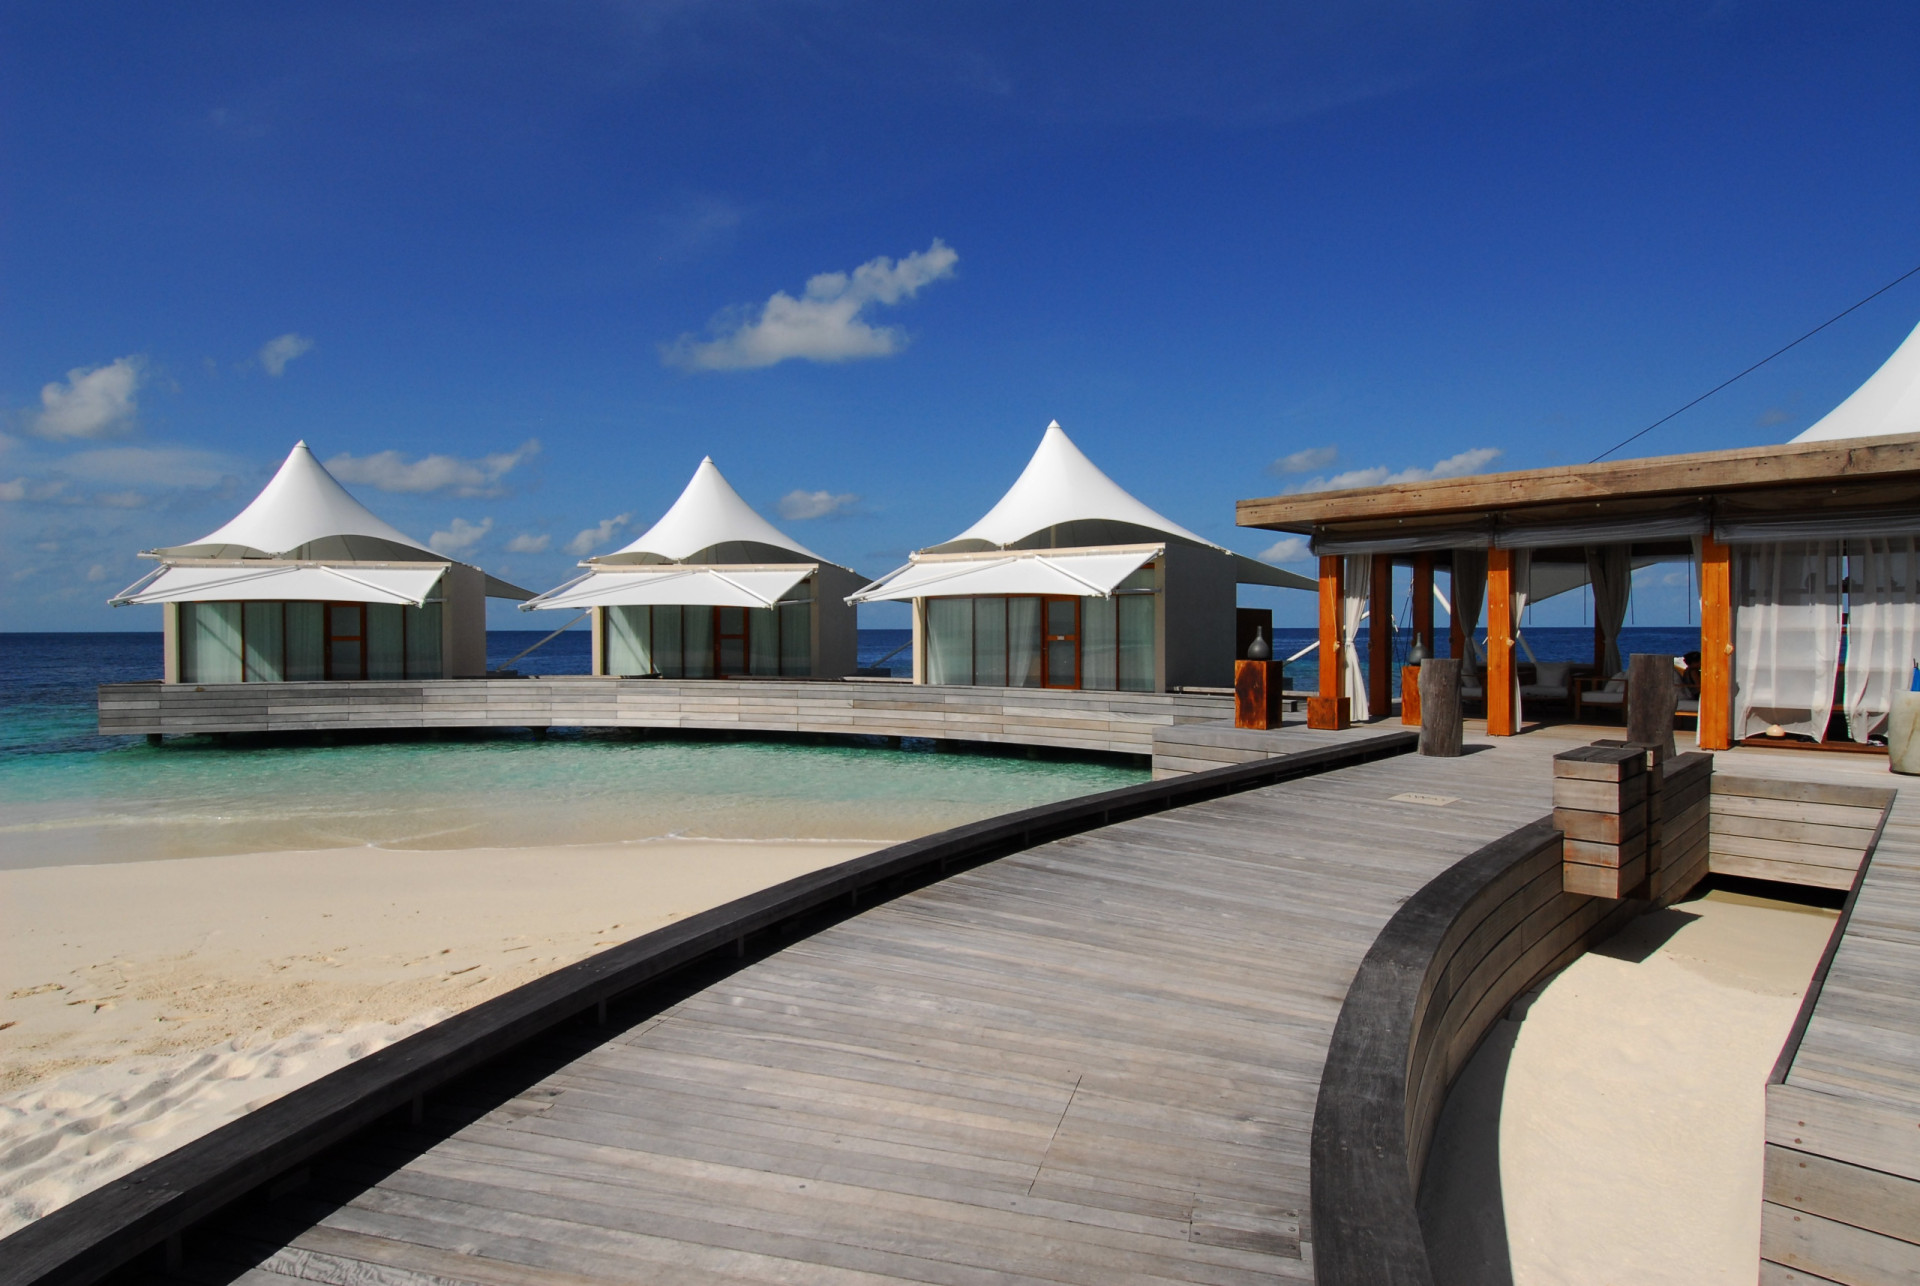 <p>For US$6.8 million, guests can turn the W Maldives resort into their own private sanctuary, with exclusive use of all 78 overwater and beach suites, gourmet dining venues, and an underground nightclub. Not bad, huh?</p><p>You may also like:<a href="https://www.starsinsider.com/n/402983?utm_source=msn.com&utm_medium=display&utm_campaign=referral_description&utm_content=555492en-us"> Celebrities who follow their faith religiously</a></p>